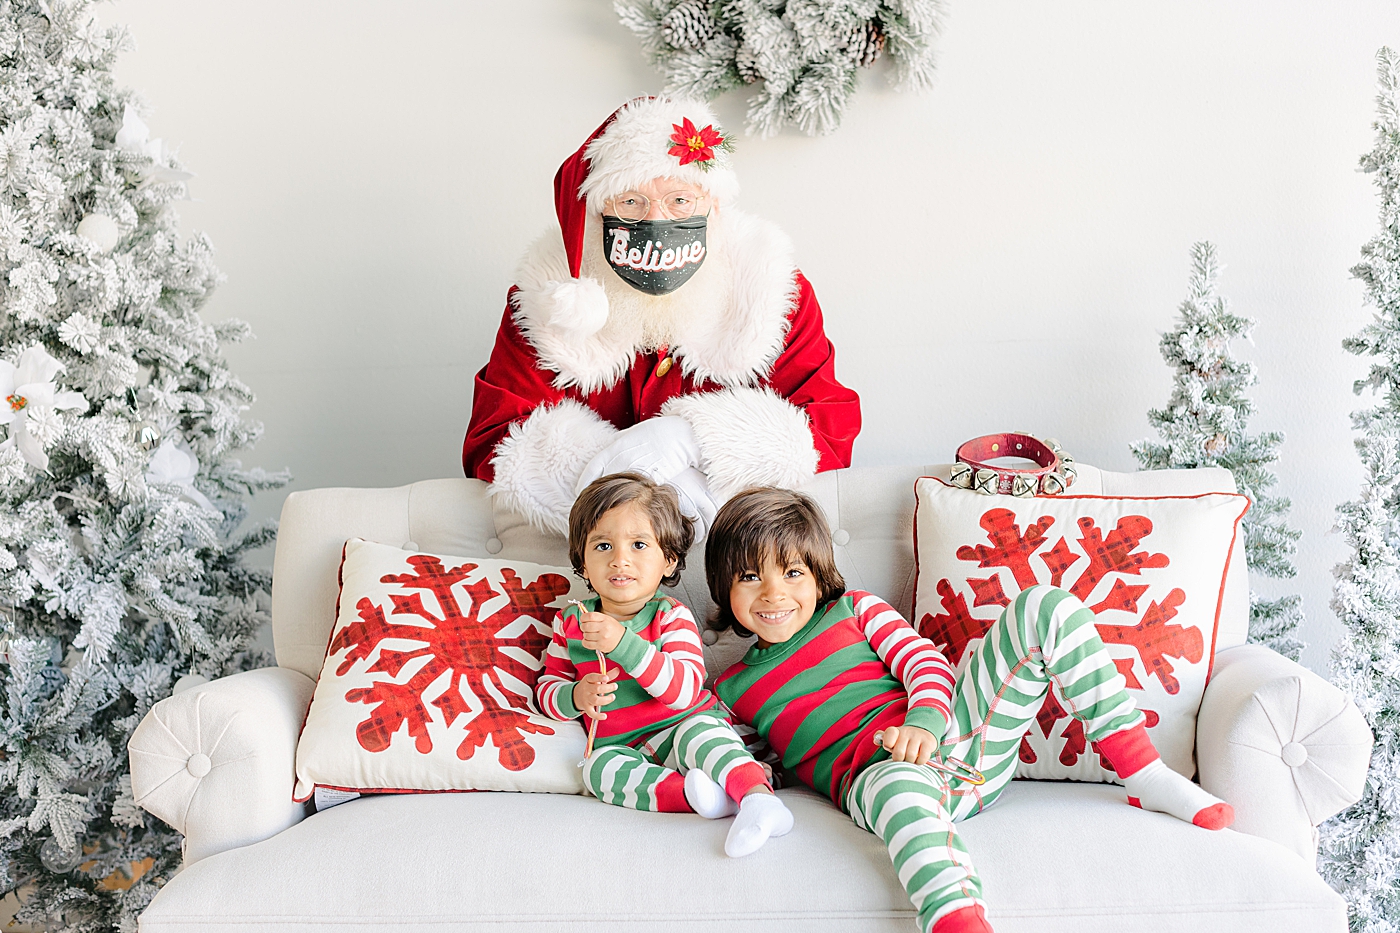 Brothers in Christmas pajamas sitting on a couch with Santa in the background | Images by Sana Ahmed Photography